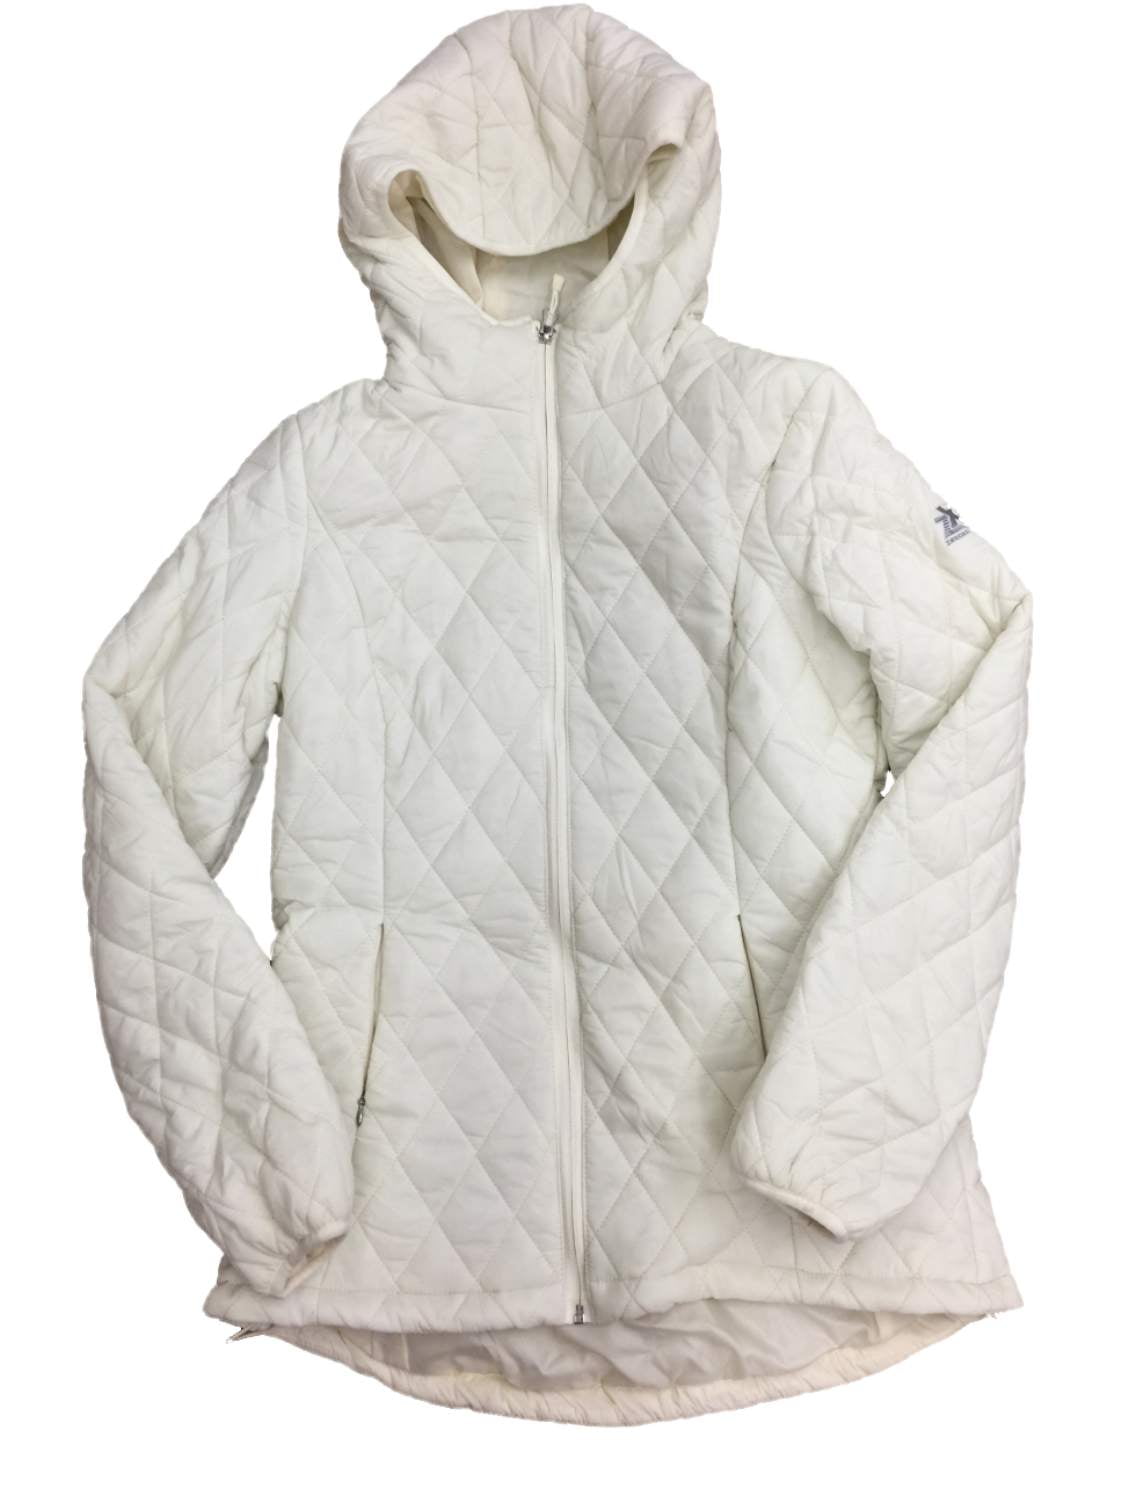 ZeroXposur - Womens White Lightweight Hooded Quilted Jacket Puffer Coat